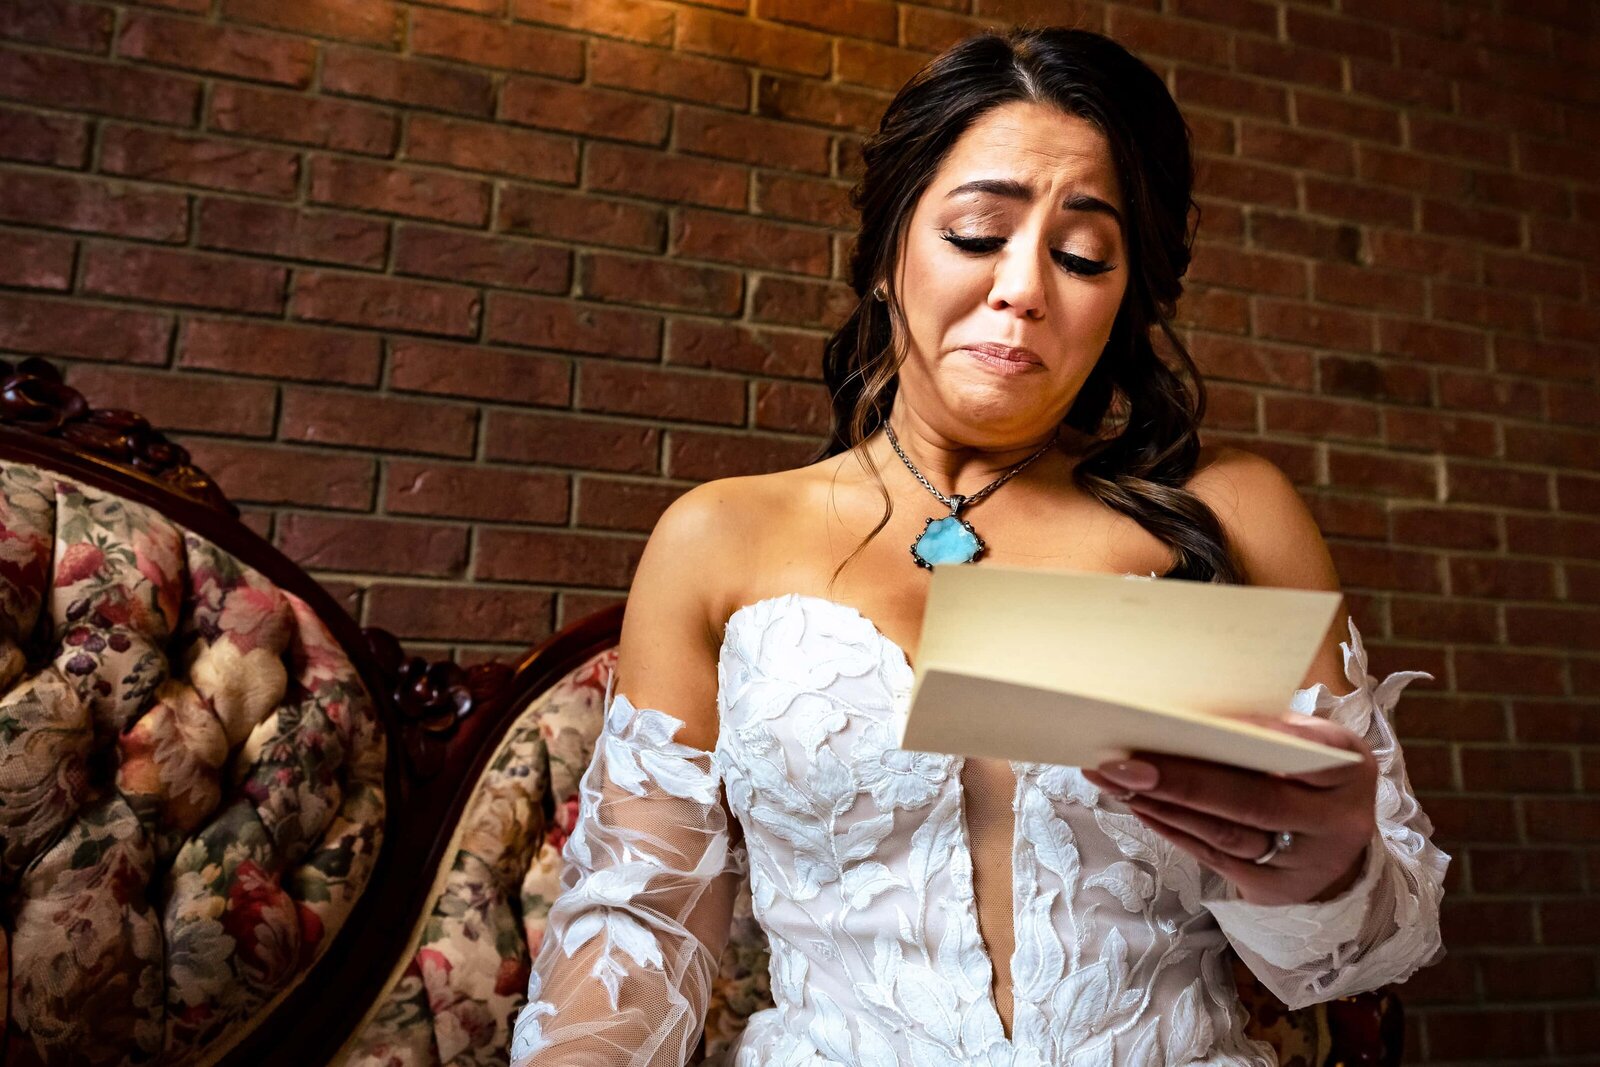 Bride cries as she reads a letter from the groom before the wedding ceremony